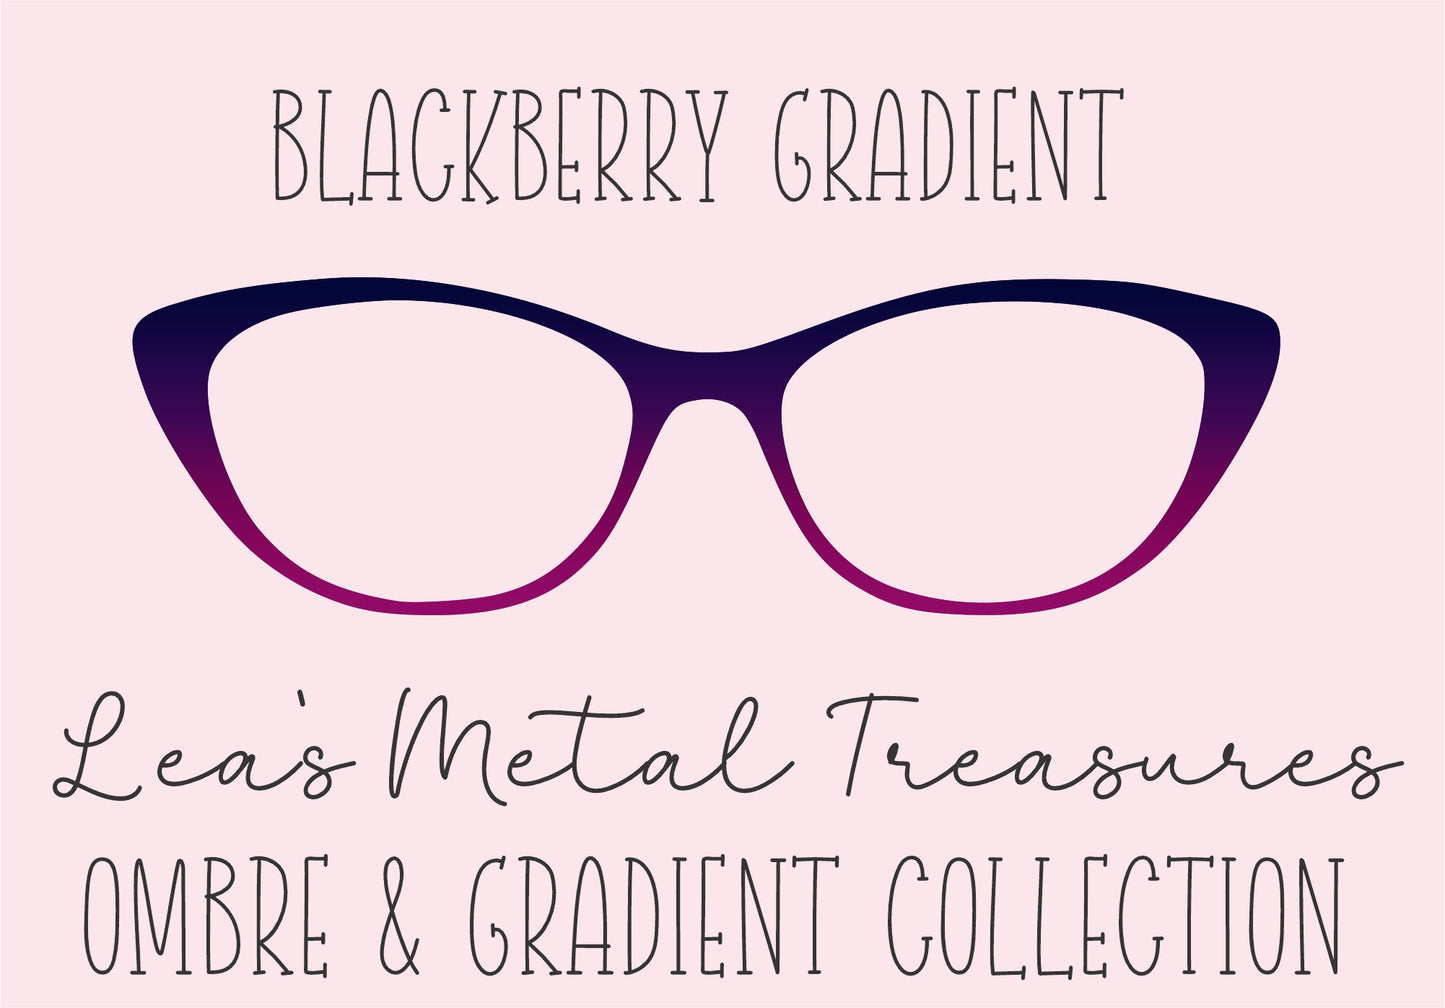 Blackberry Gradient Eyewear Frame Toppers COMES WITH MAGNETS